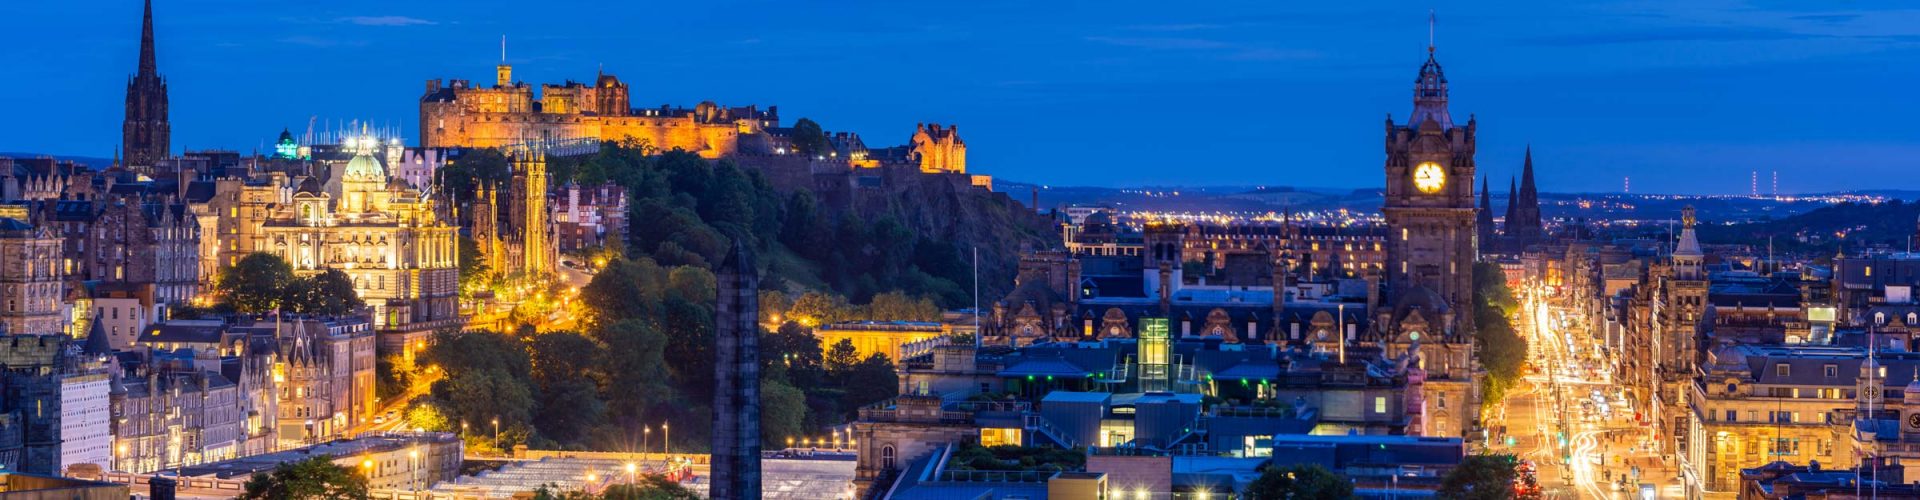 View of Edinburgh at night from Calton Hill